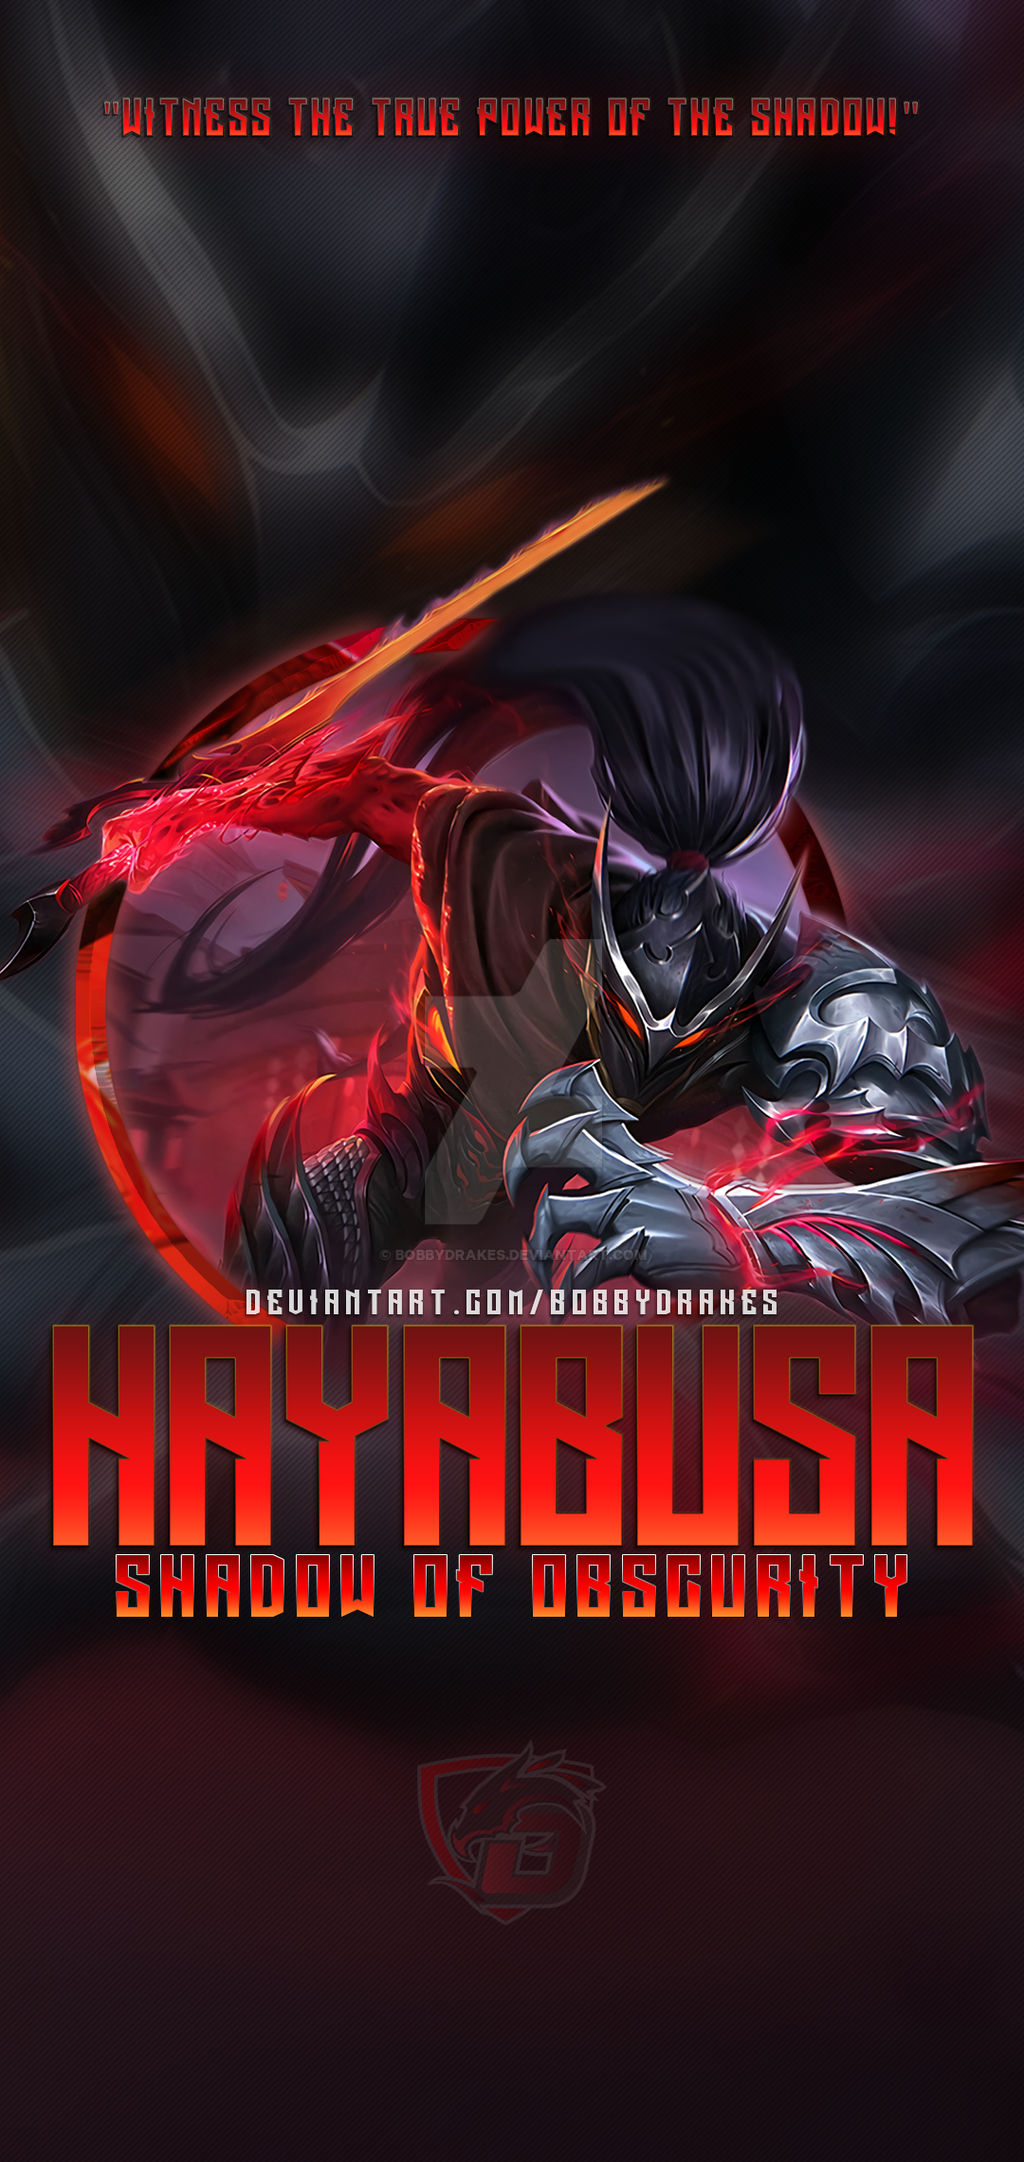 ShadowOfObscurity hayabusa mobile wallpaper by bobbydrakes on DeviantArt